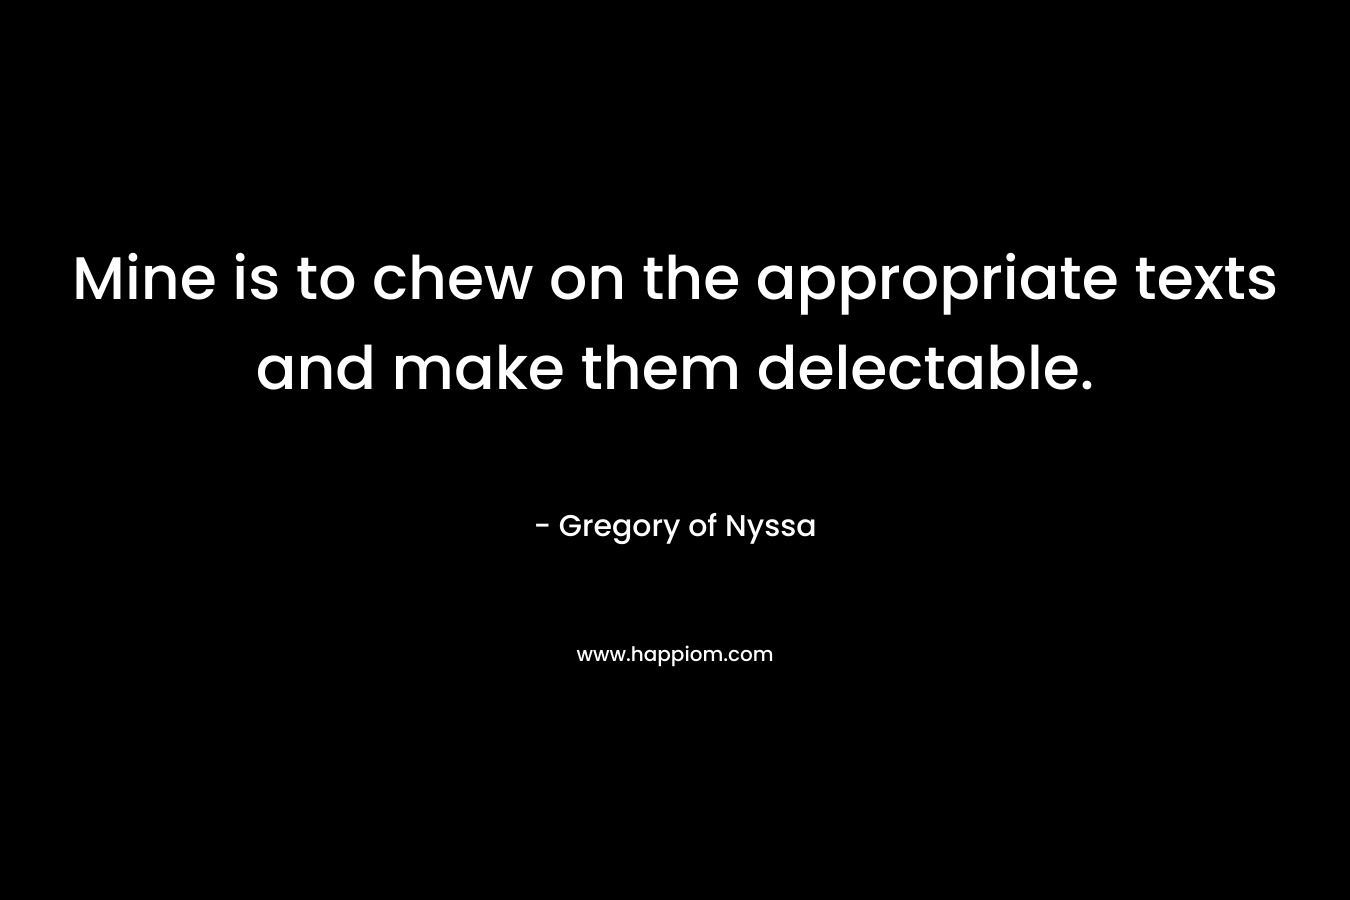 Mine is to chew on the appropriate texts and make them delectable. – Gregory of Nyssa